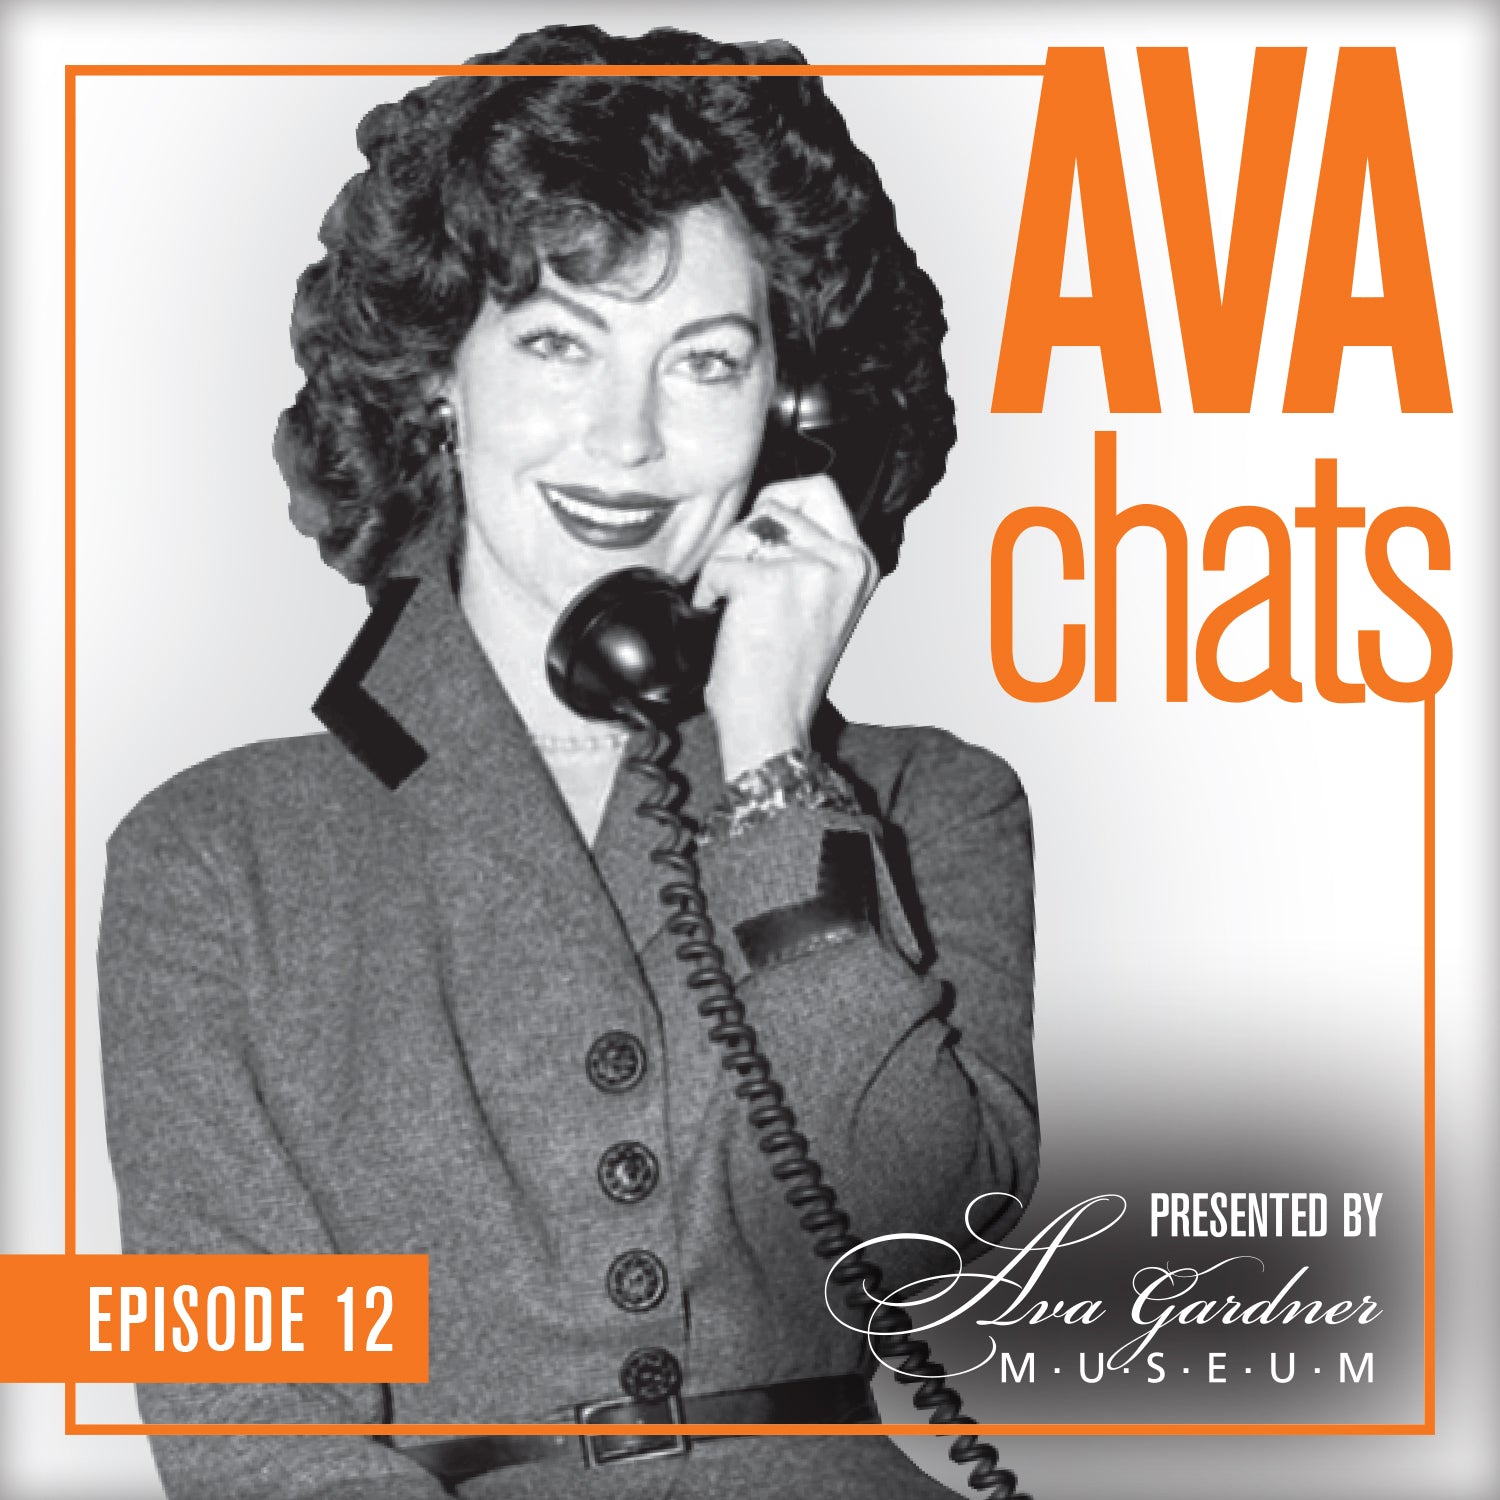 Ava Chats: Talking Price-Wise with Victoria Price